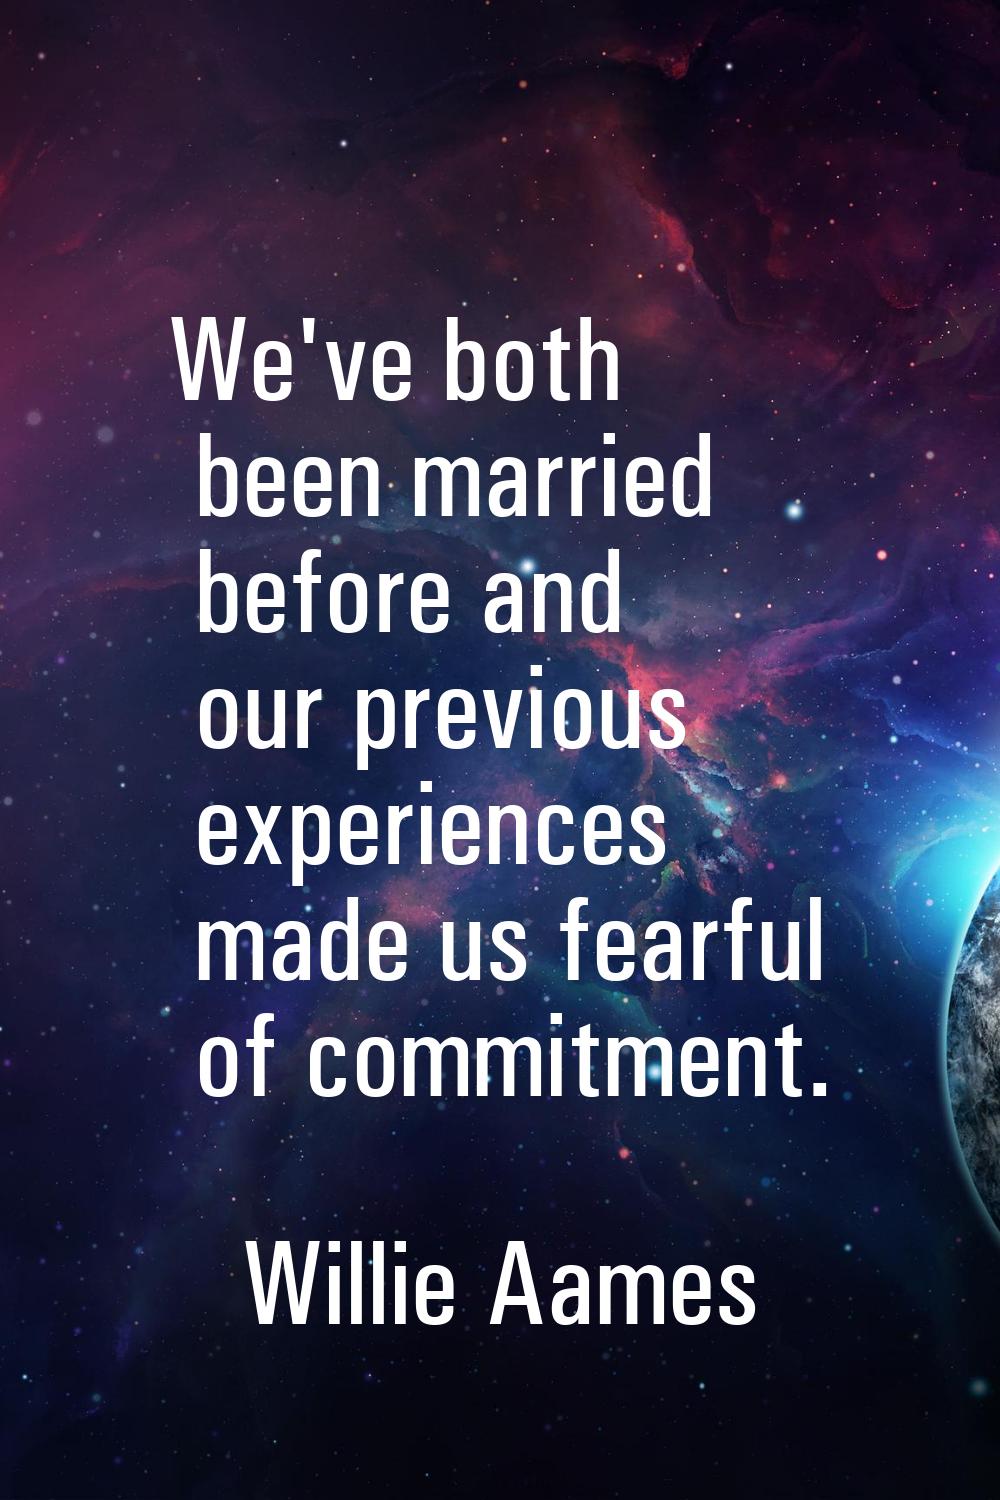 We've both been married before and our previous experiences made us fearful of commitment.